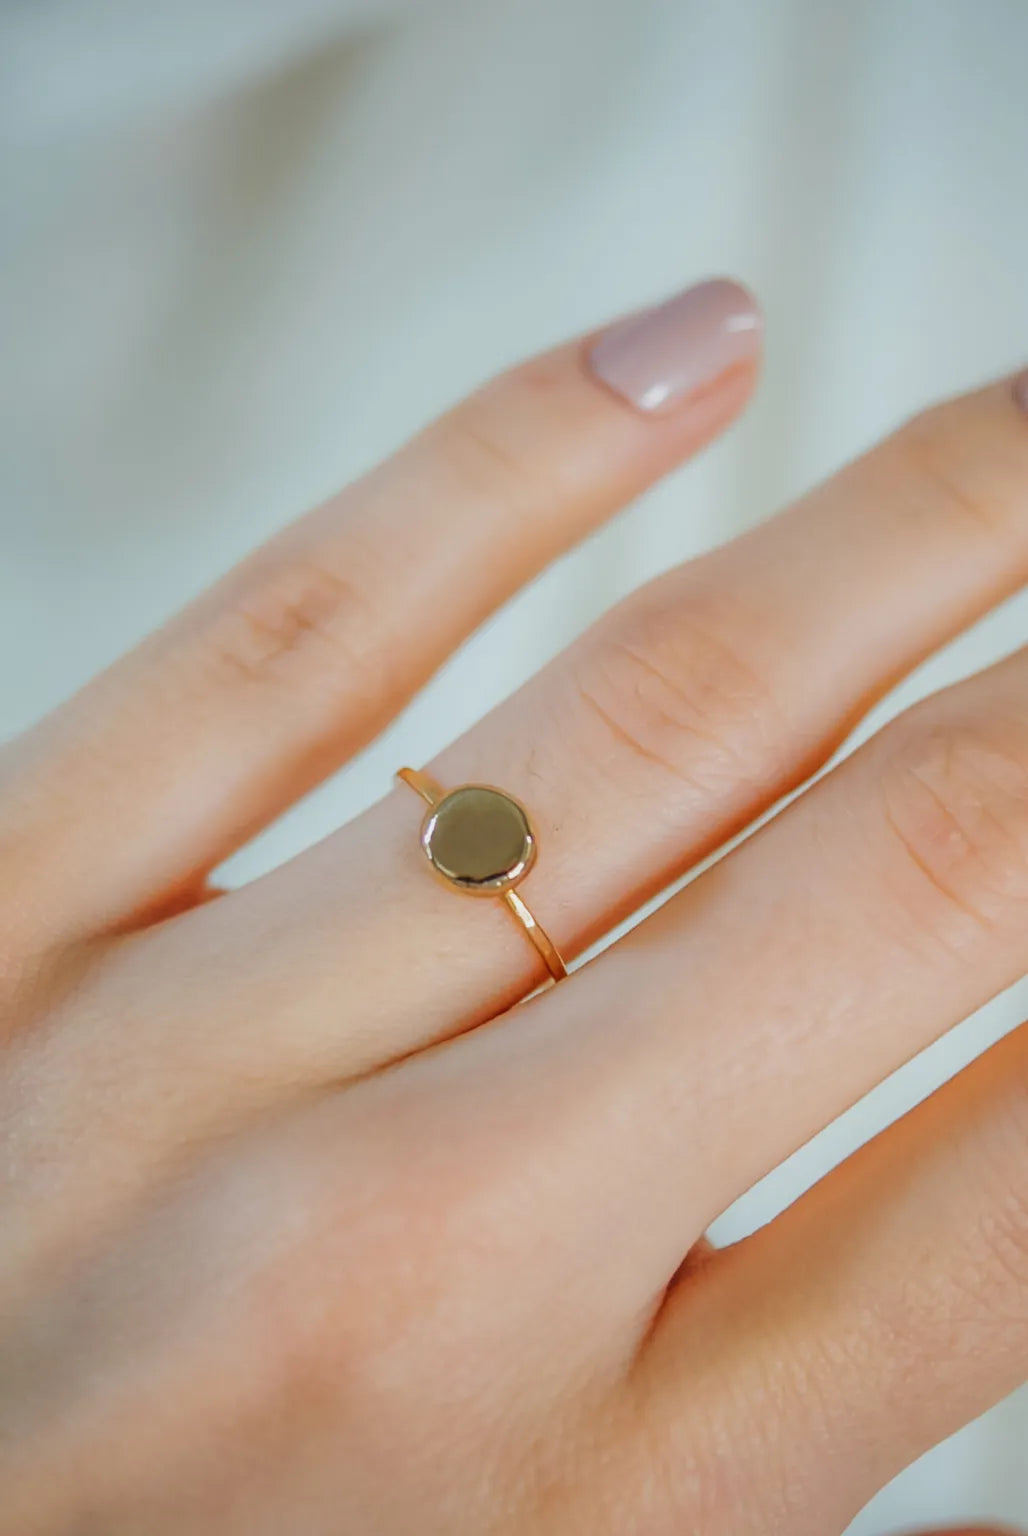 Pebble Ring, Solid 14K Gold